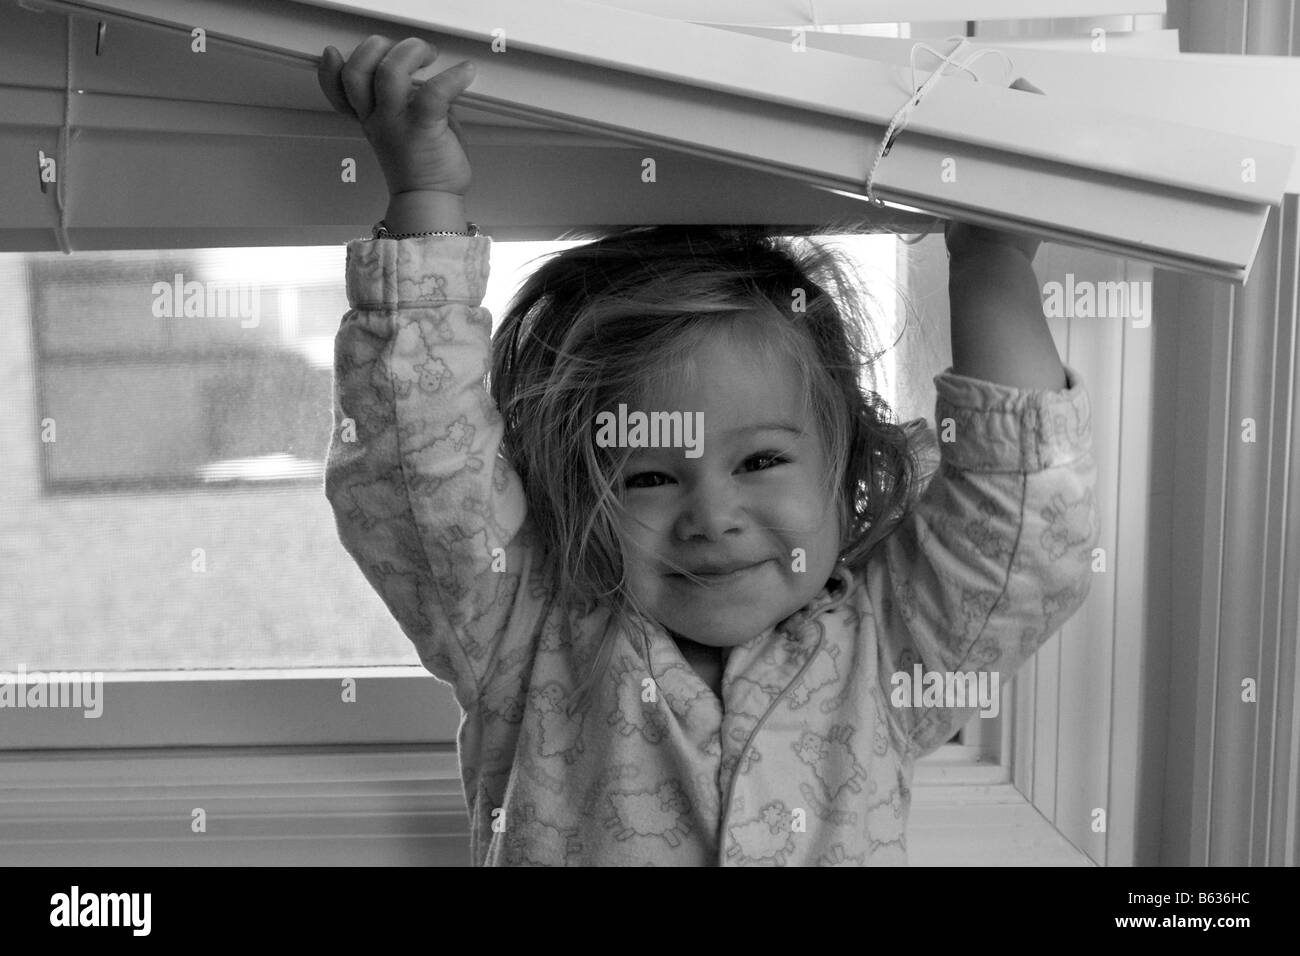 Portrait of a baby girl holding blinds and smiling Banque D'Images